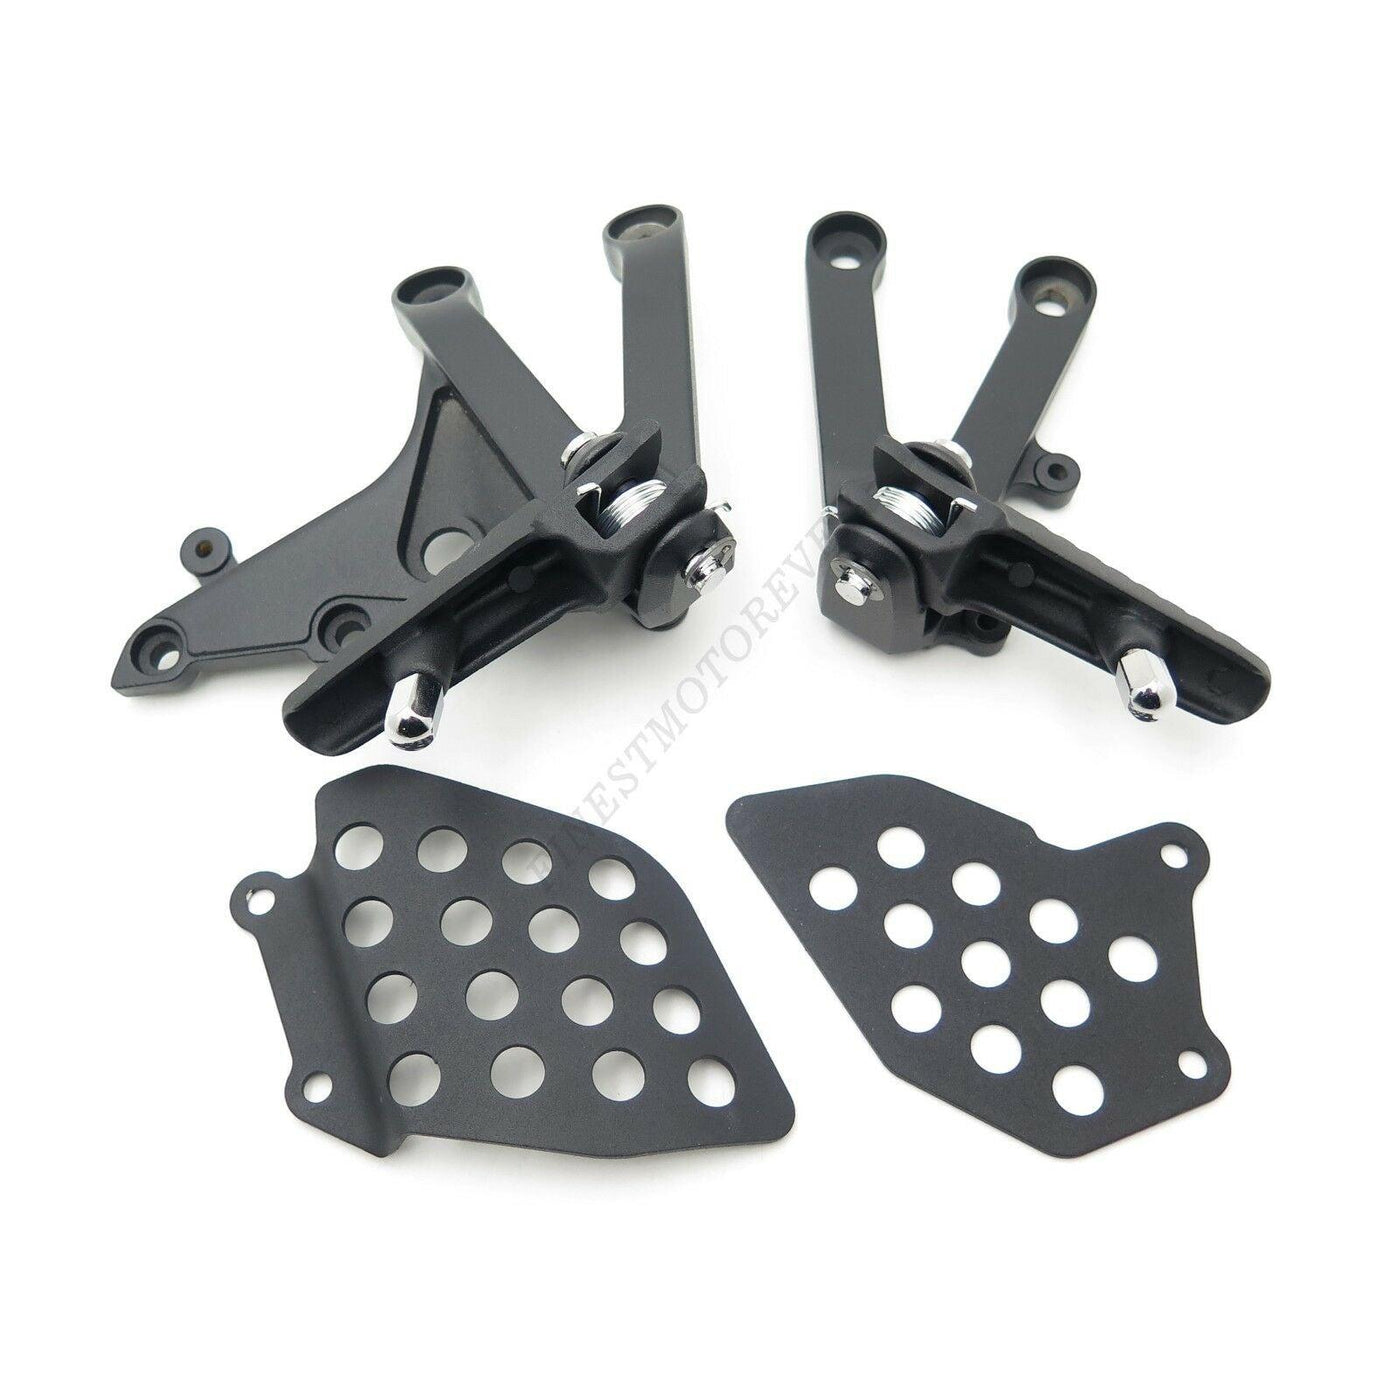 Black Front Rider Foot Pegs Bracket Fit For Honda Cbr600Rr Rr 2007 2008-2014 - Moto Life Products